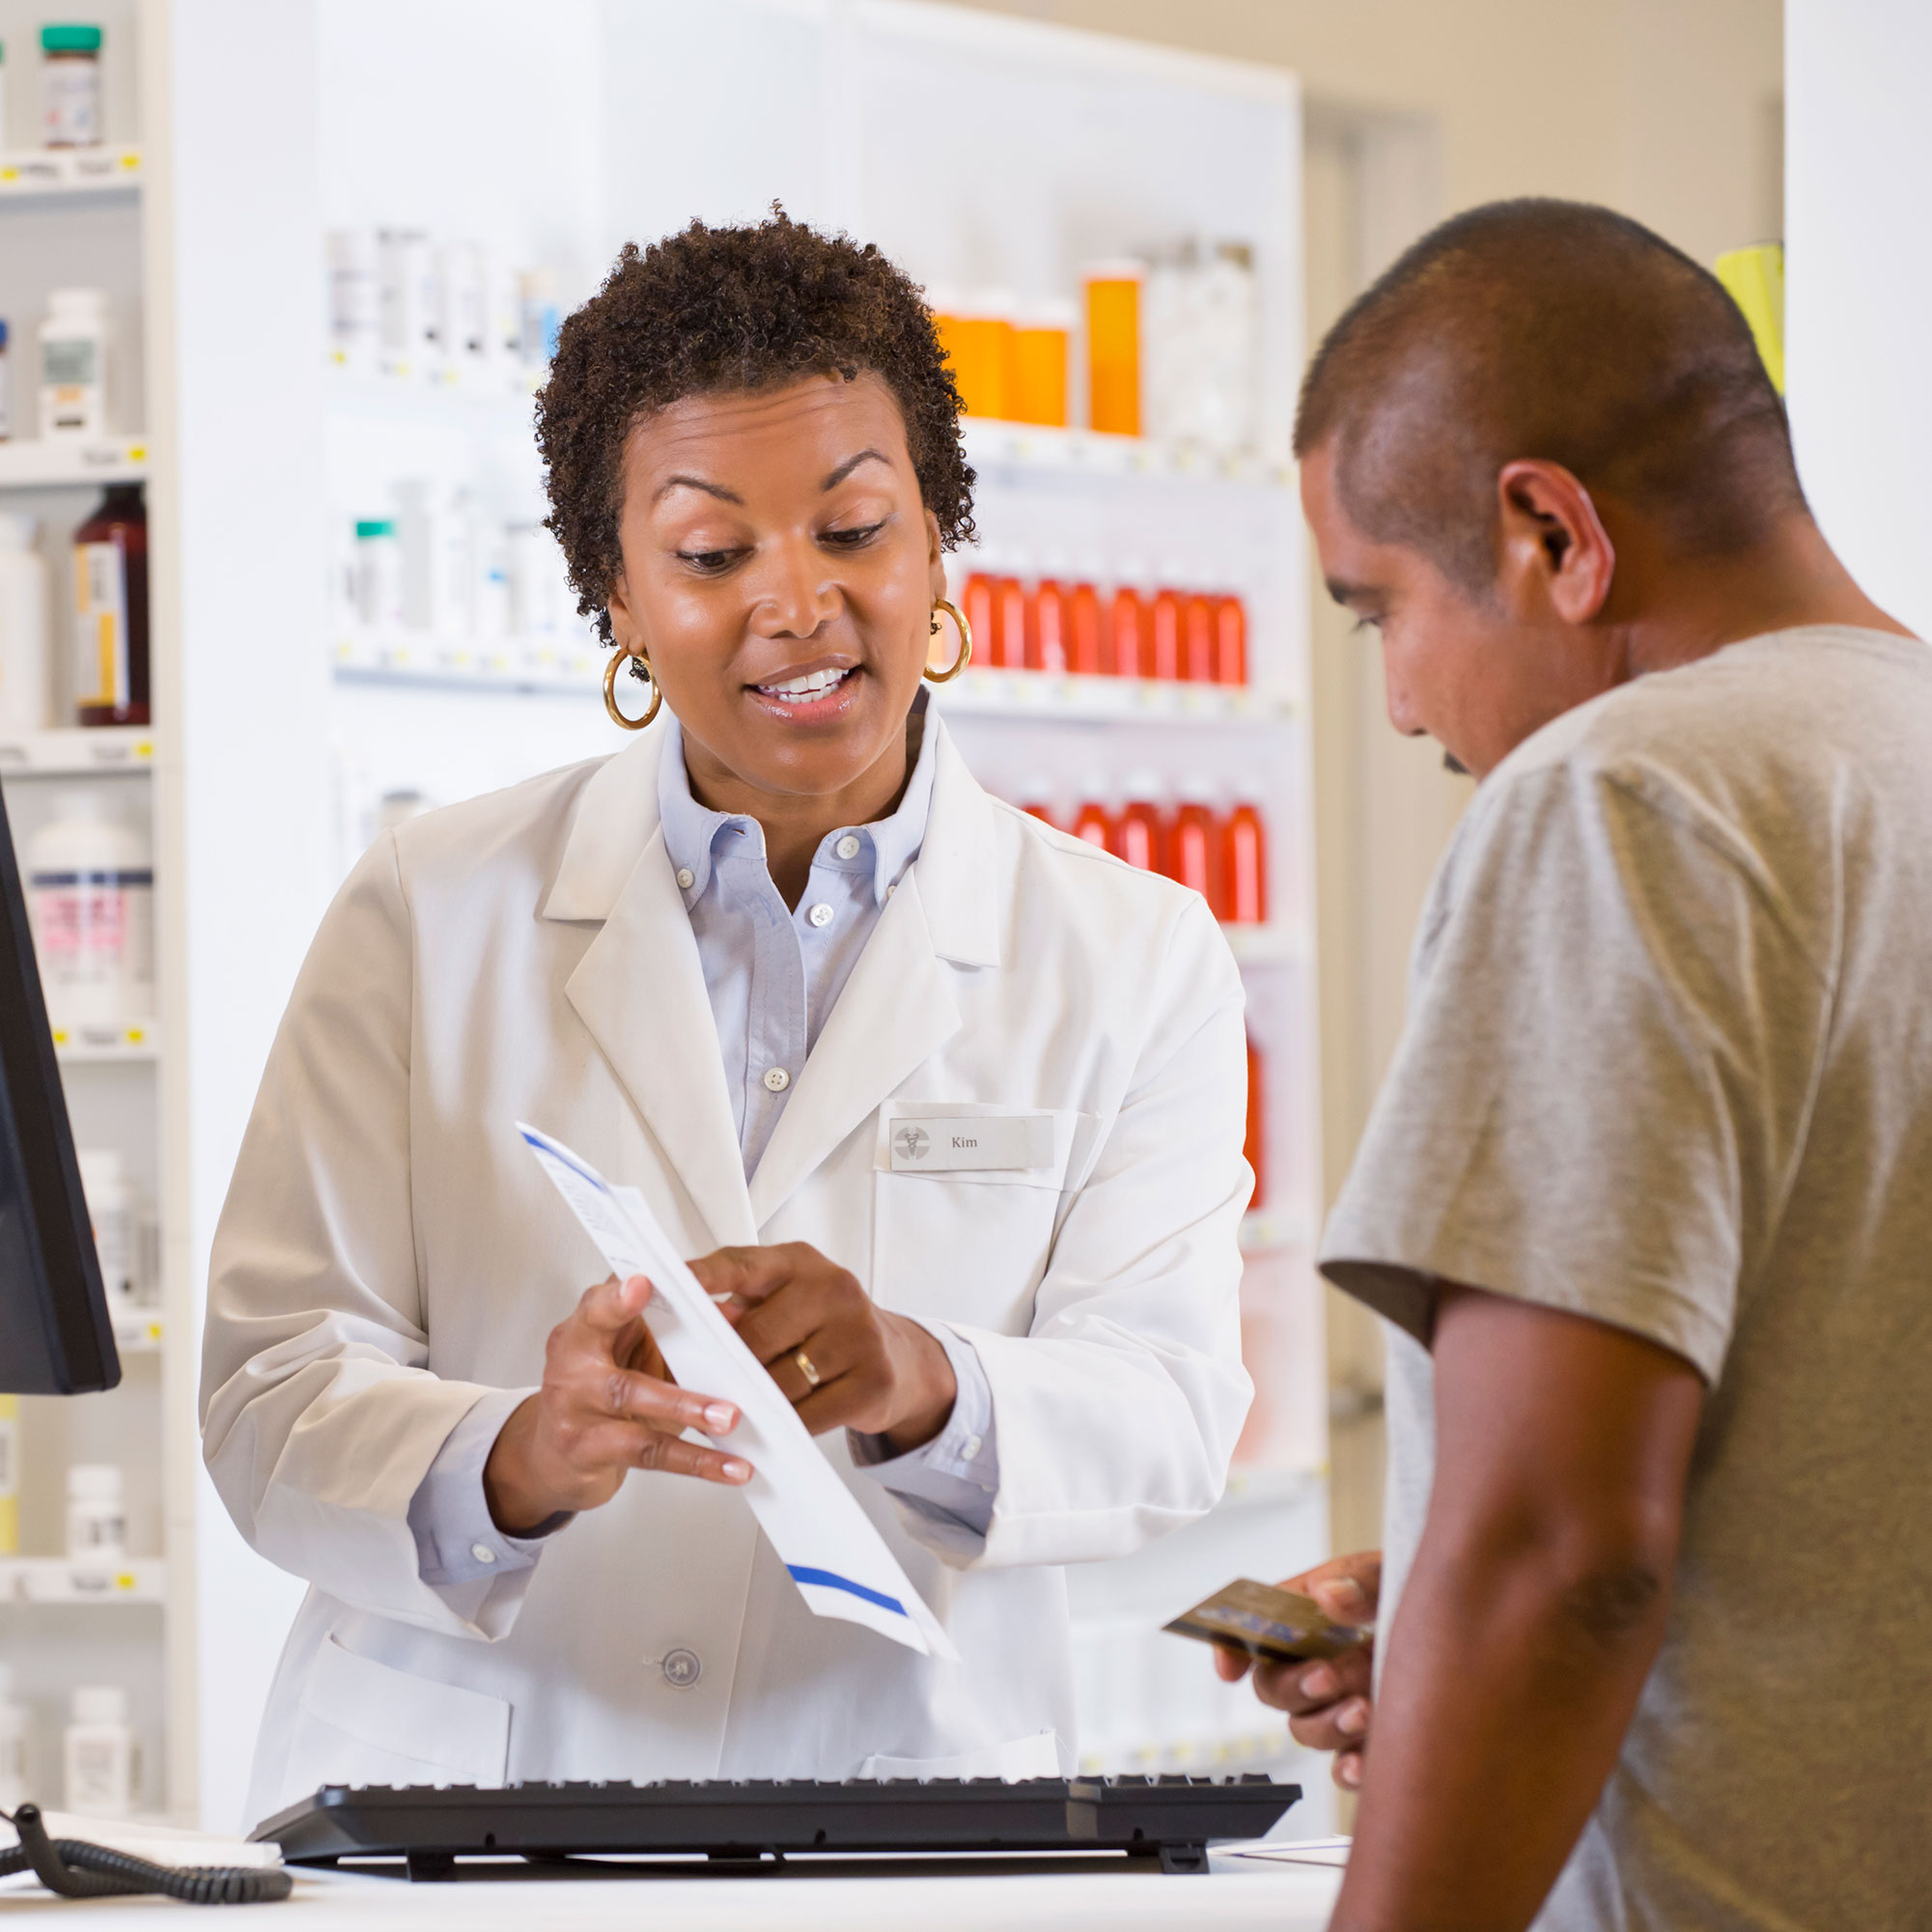 A pharmacist stands at the register and explains the prescription to a client.